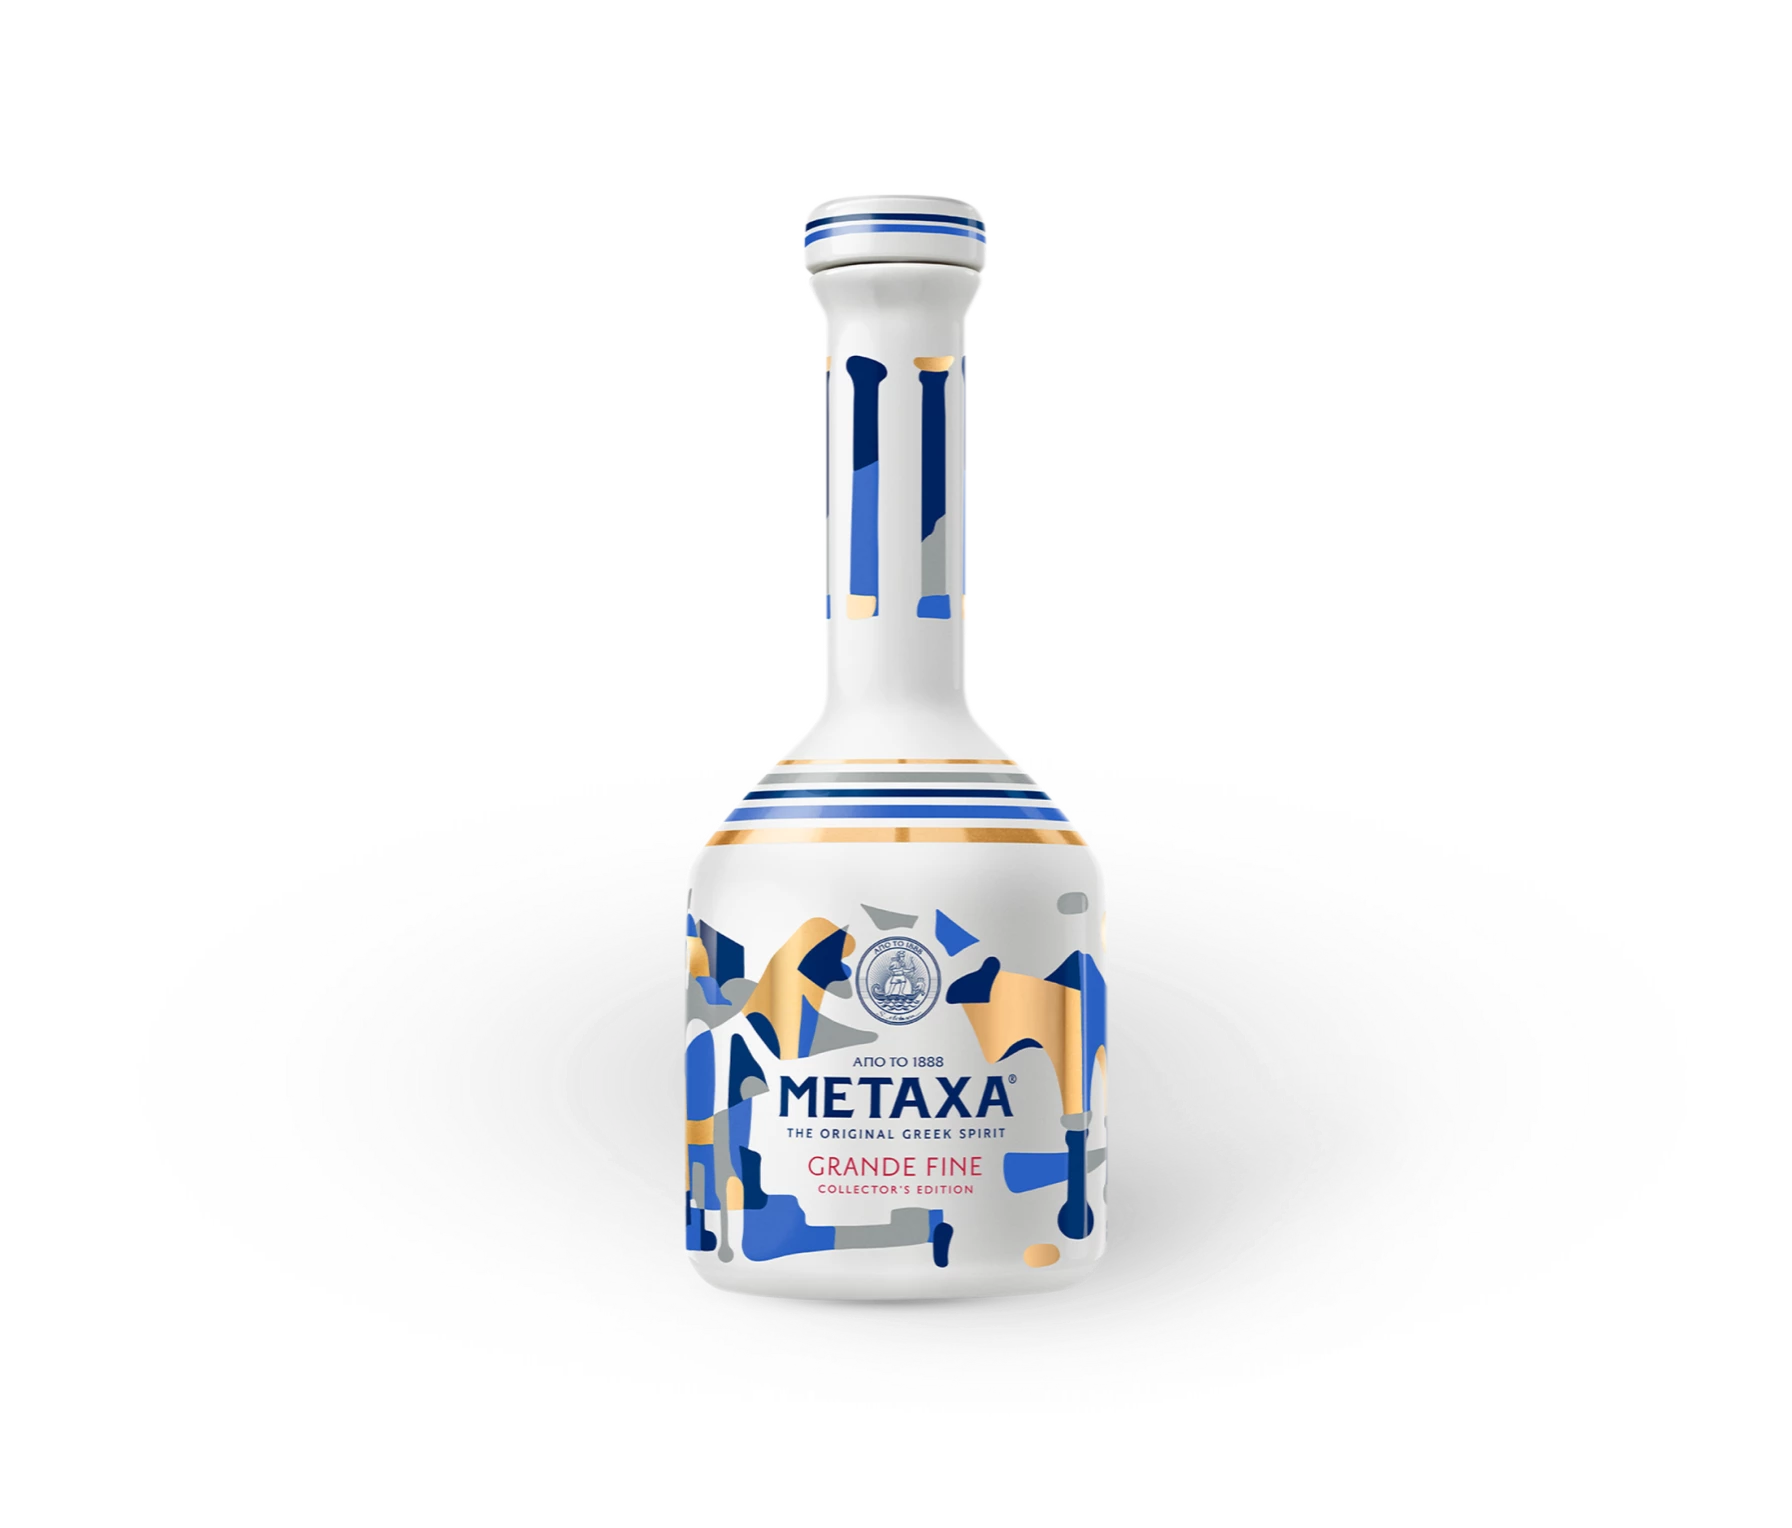 METAXA 12 spicy with dried fruit Stars notes 